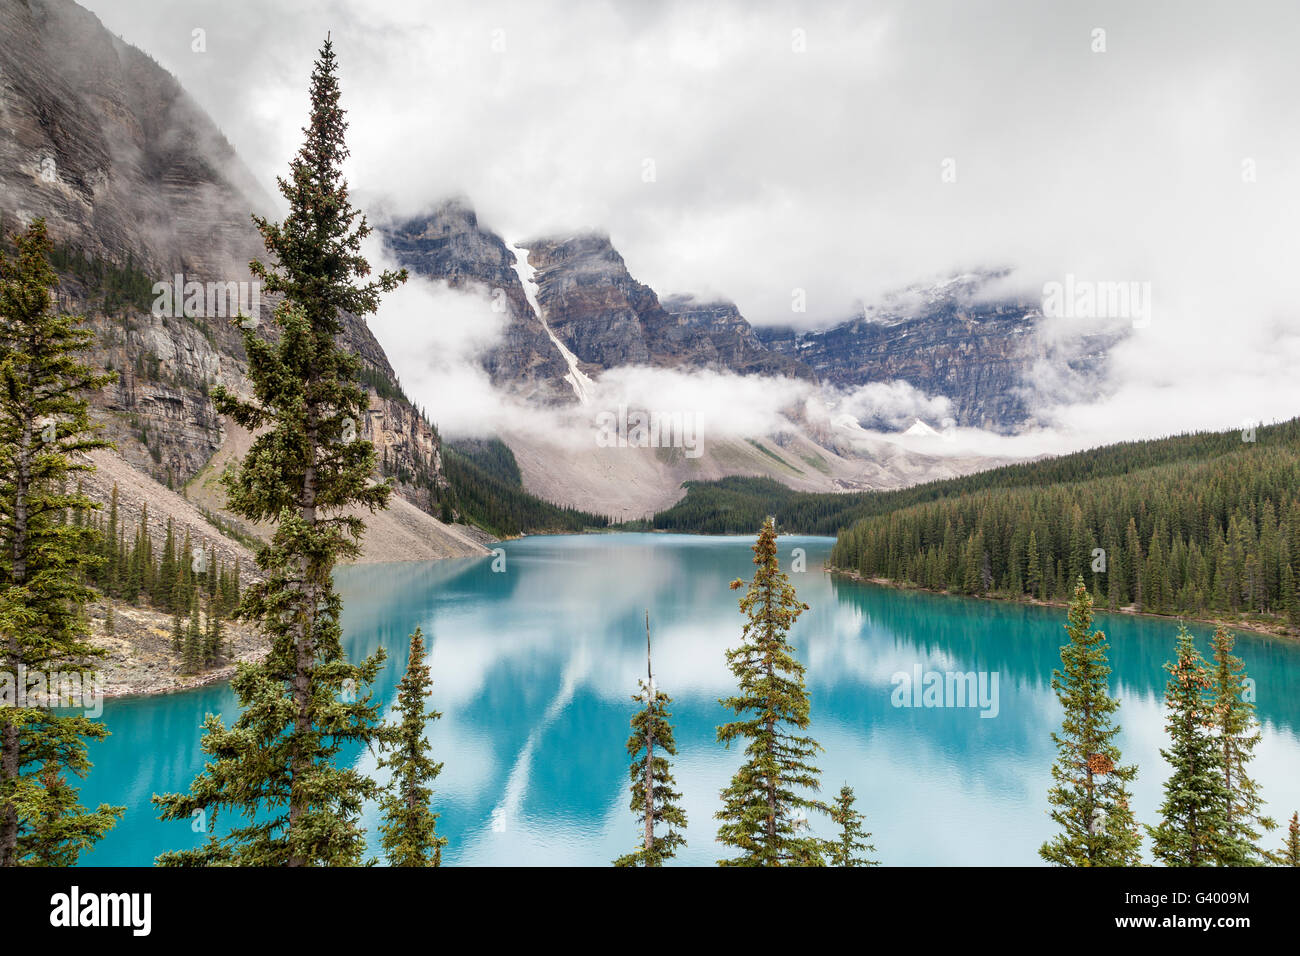 Fog and clouds descend onto the Valley of the Ten Peaks where glacier-fed Moraine Lake gives off its distinct turquoise blue col Stock Photo